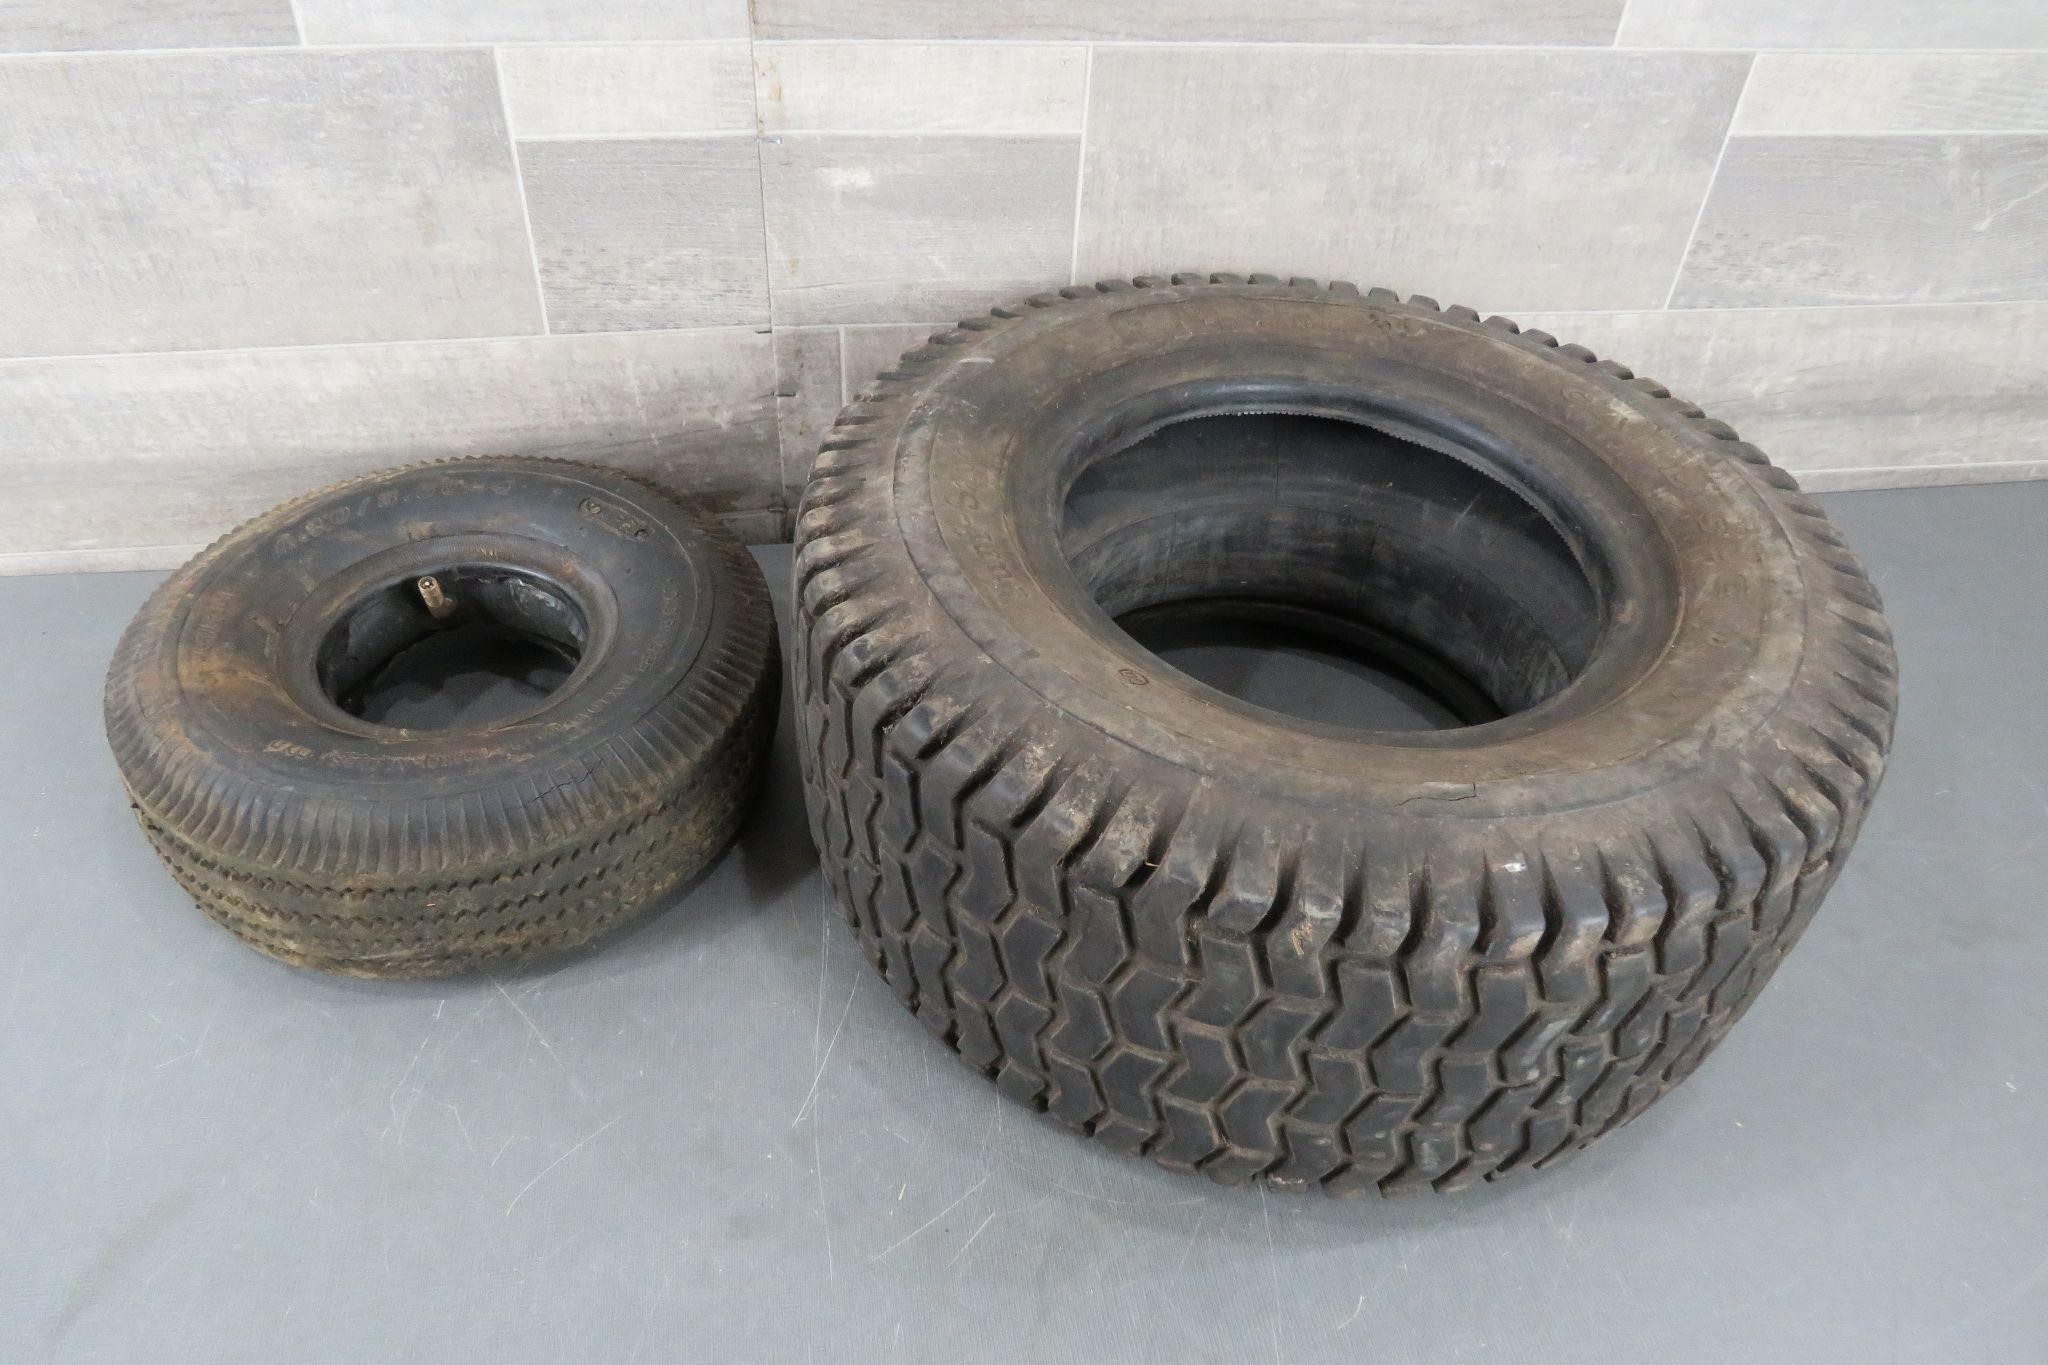 TWO TIRES (1) @16X6.50-3 (1)@4.10/3.50-4